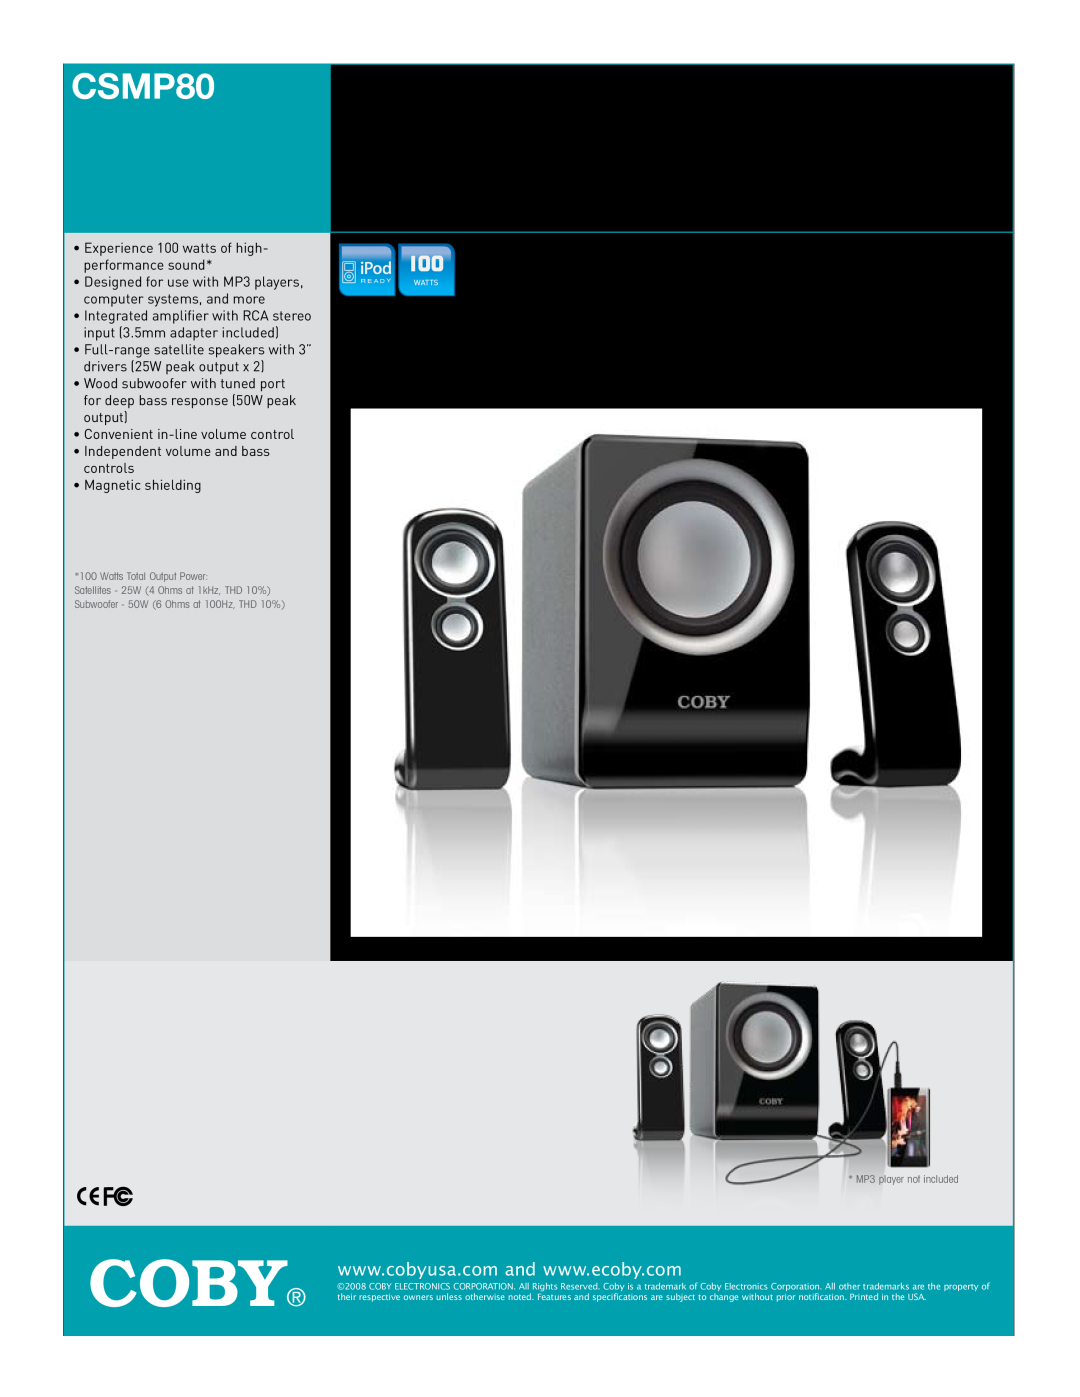 COBY electronic CSMP80 specifications Coby, 100W 2.1-CHANNELMULTIMEDIA SPEAKER SYSTEM 